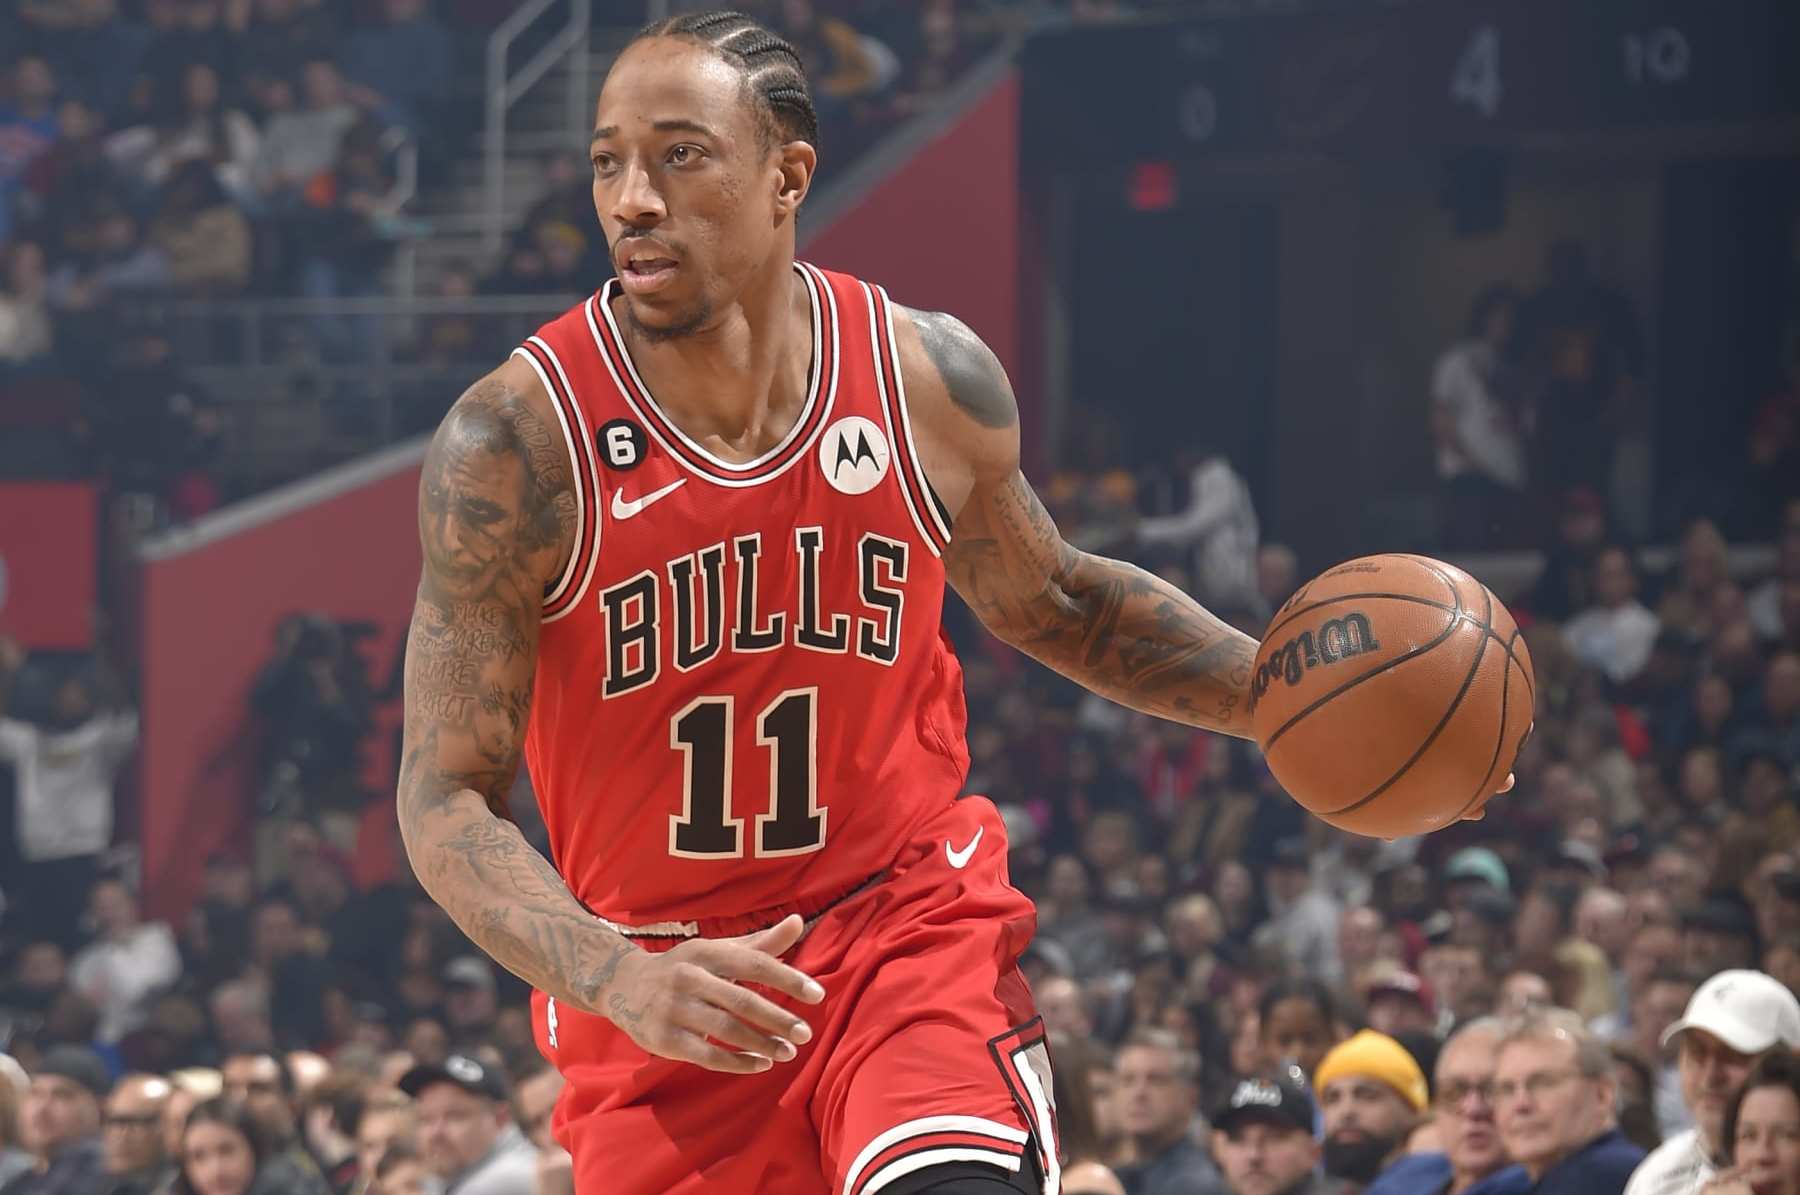 Chicago Bulls guard DeMar DeRozan placed in NBA's Health and